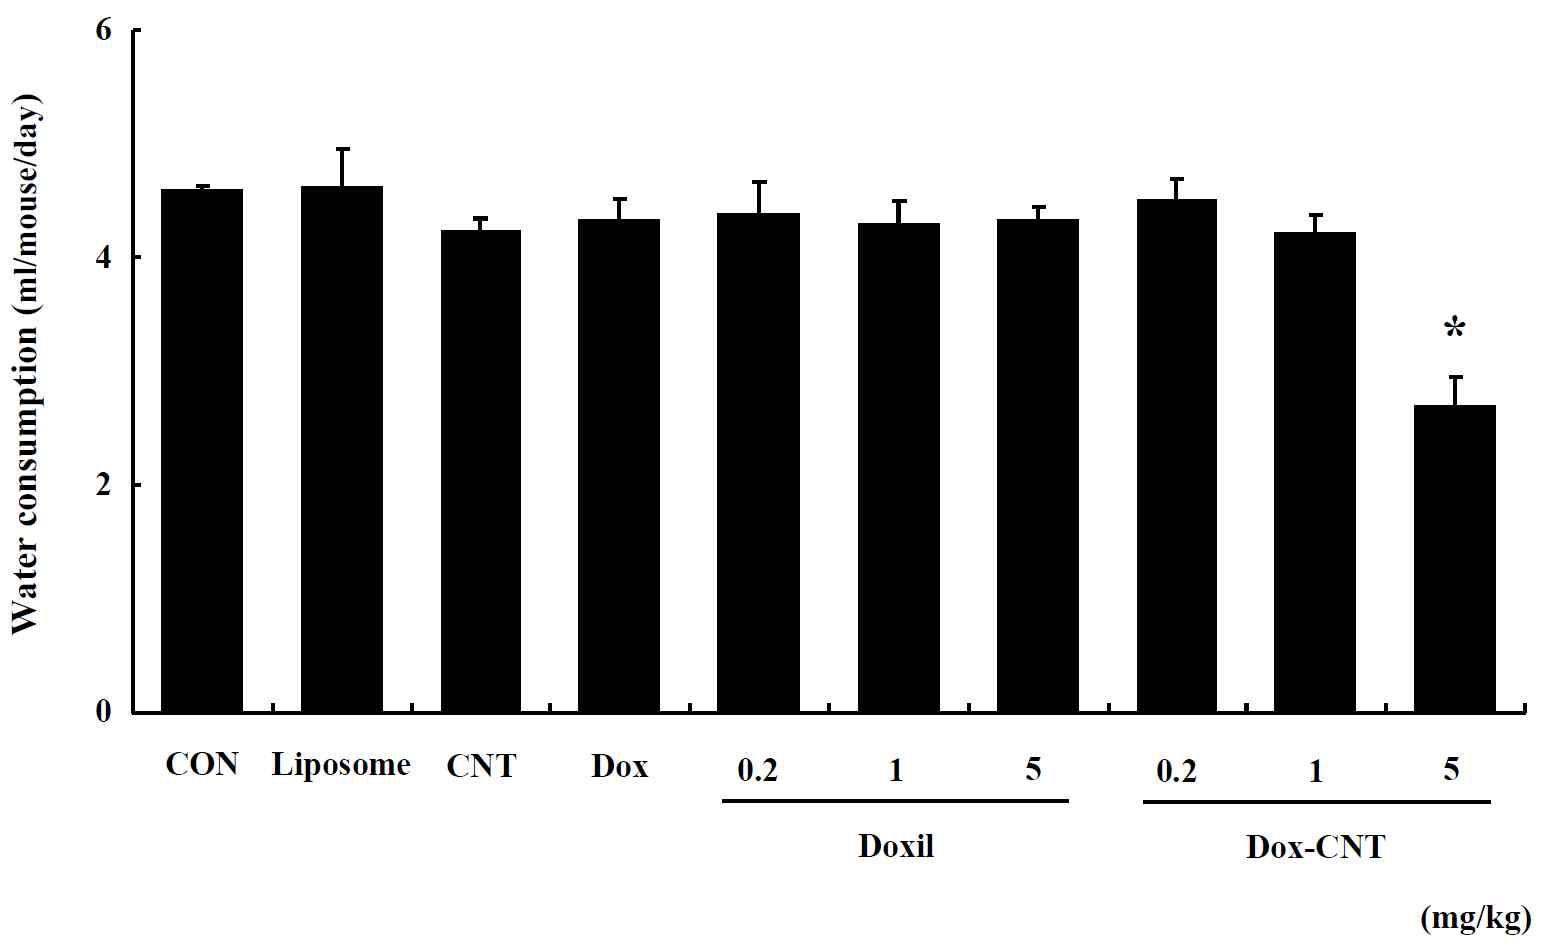 The change of water consumption in female ICR mice for 14 days after single exposure. Mice were respectively administered by intravenous injection with liposome, CNT, Dox, Doxil (0.2, 1, 5 mg/kg) and Dox-CNT (0.2, 1, 5 mg/kg). The results are presented as mean ± SE (n = 10). * p < 0.05, significantly different from the control.